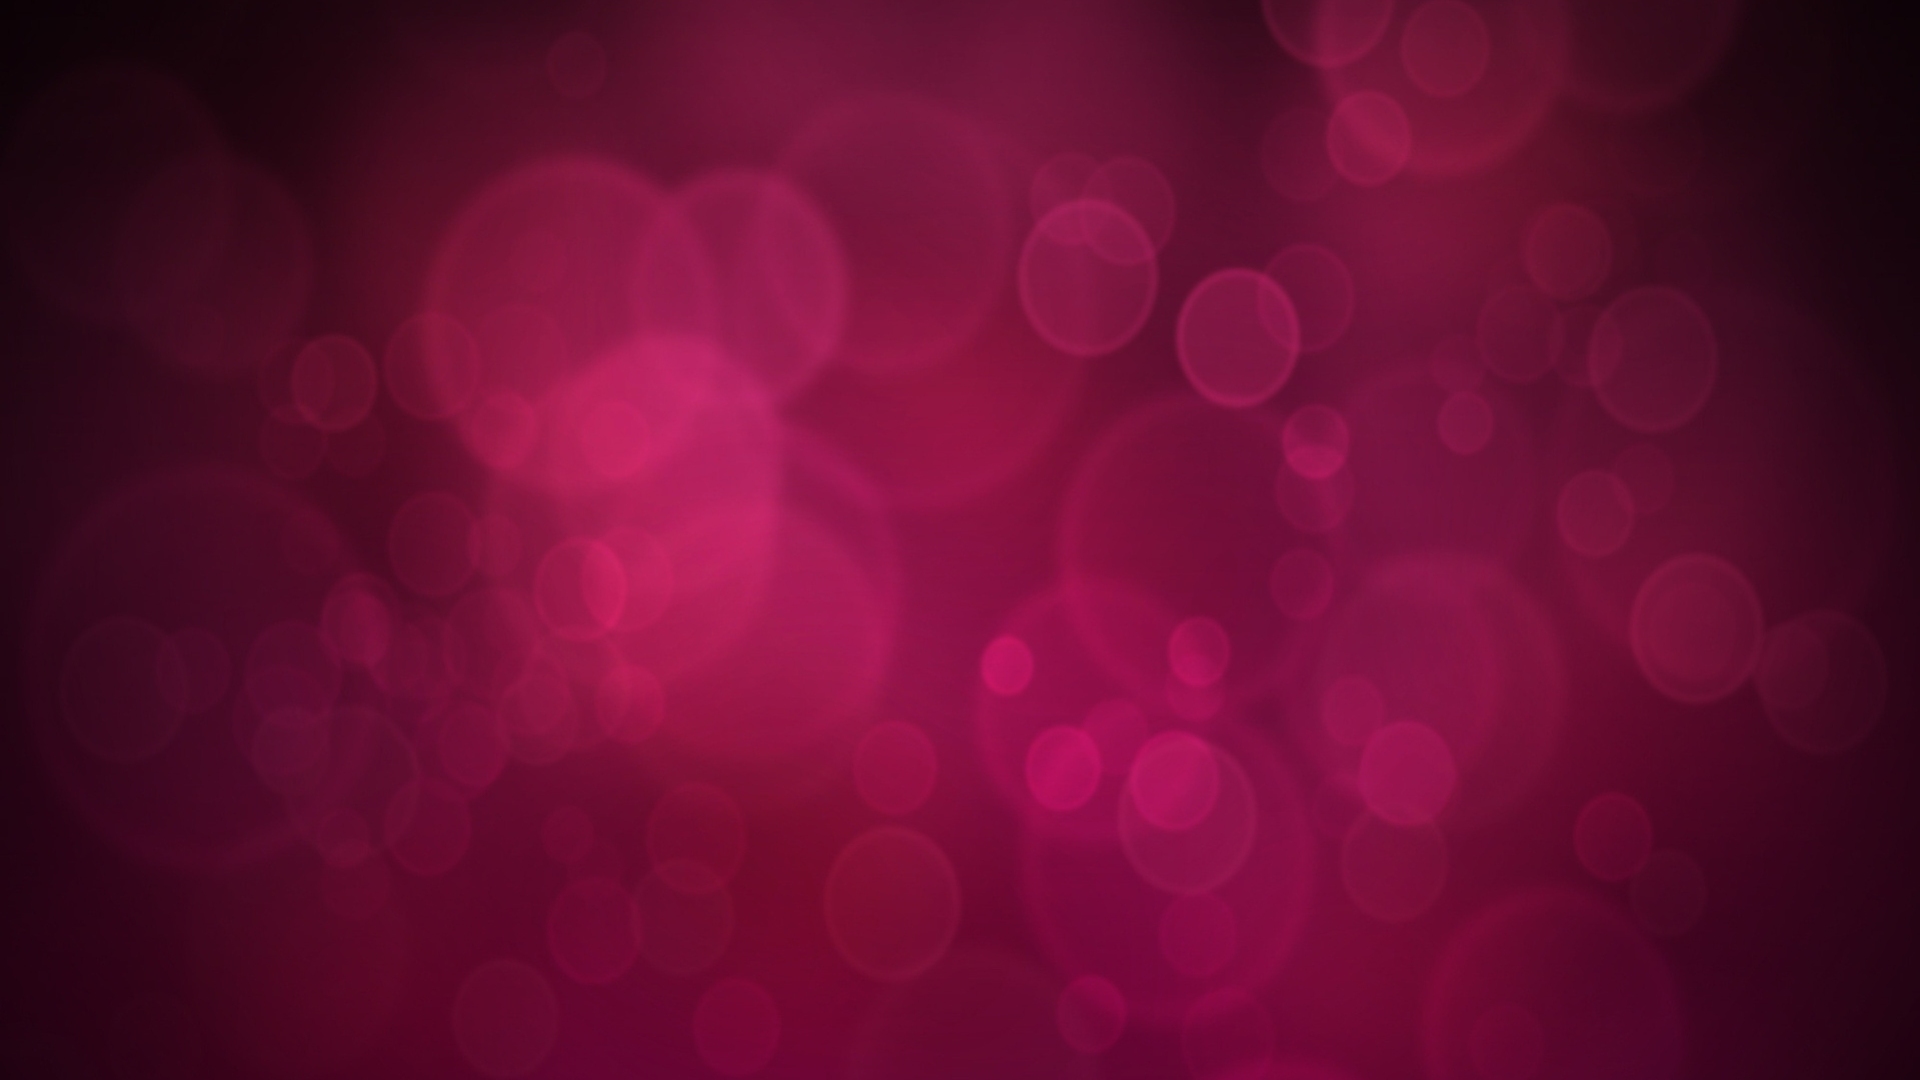 Pink Color 1920x1080 - Wallpaper, High Definition, High Quality, Widescreen